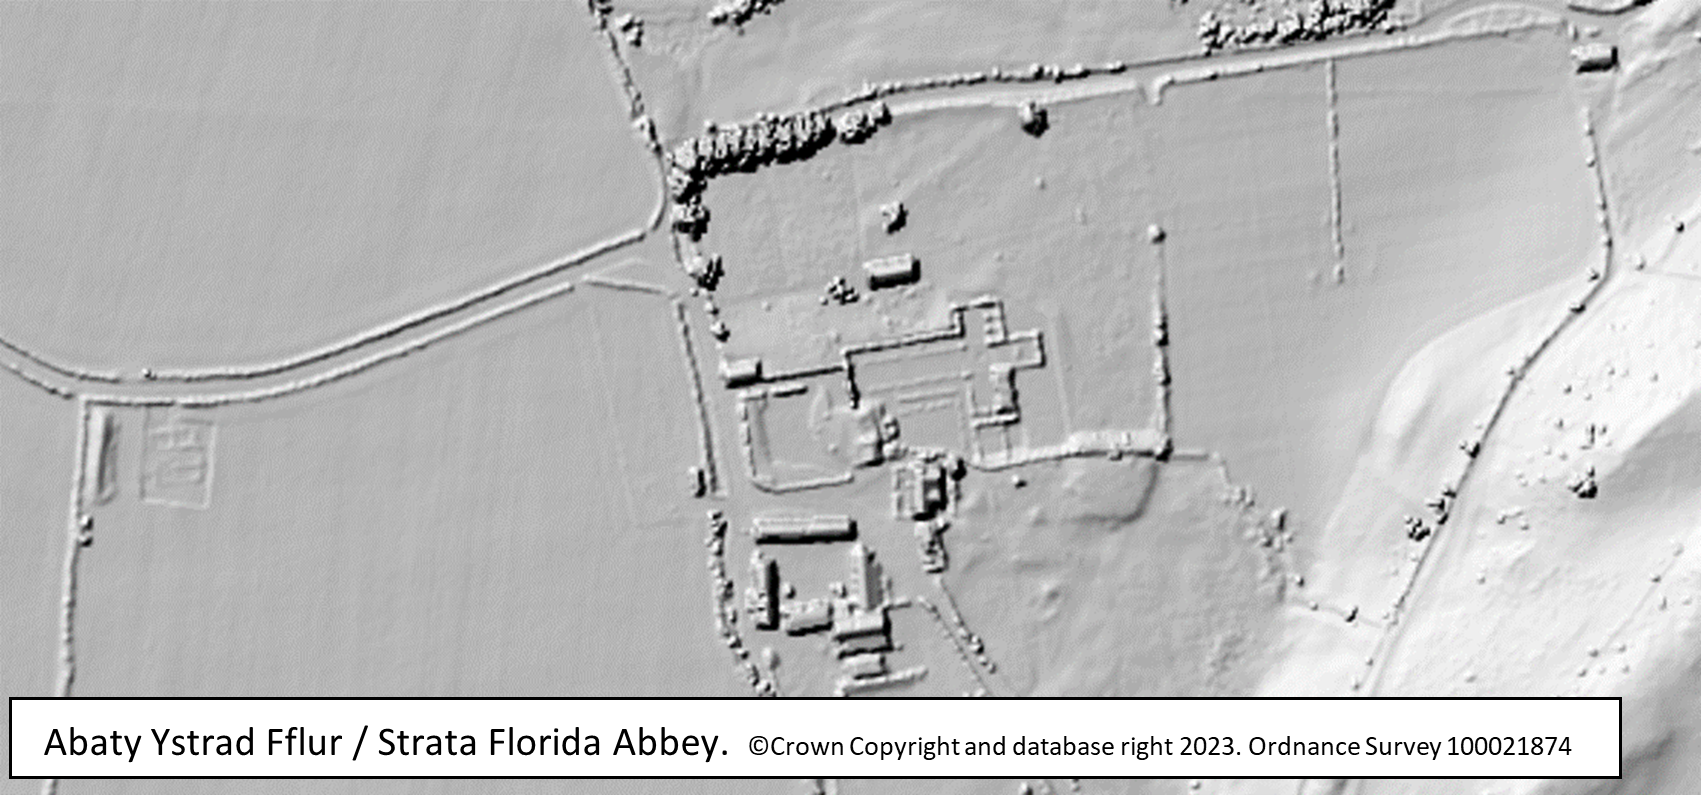 LiDAR image of Strata Florida Abbey in Wales